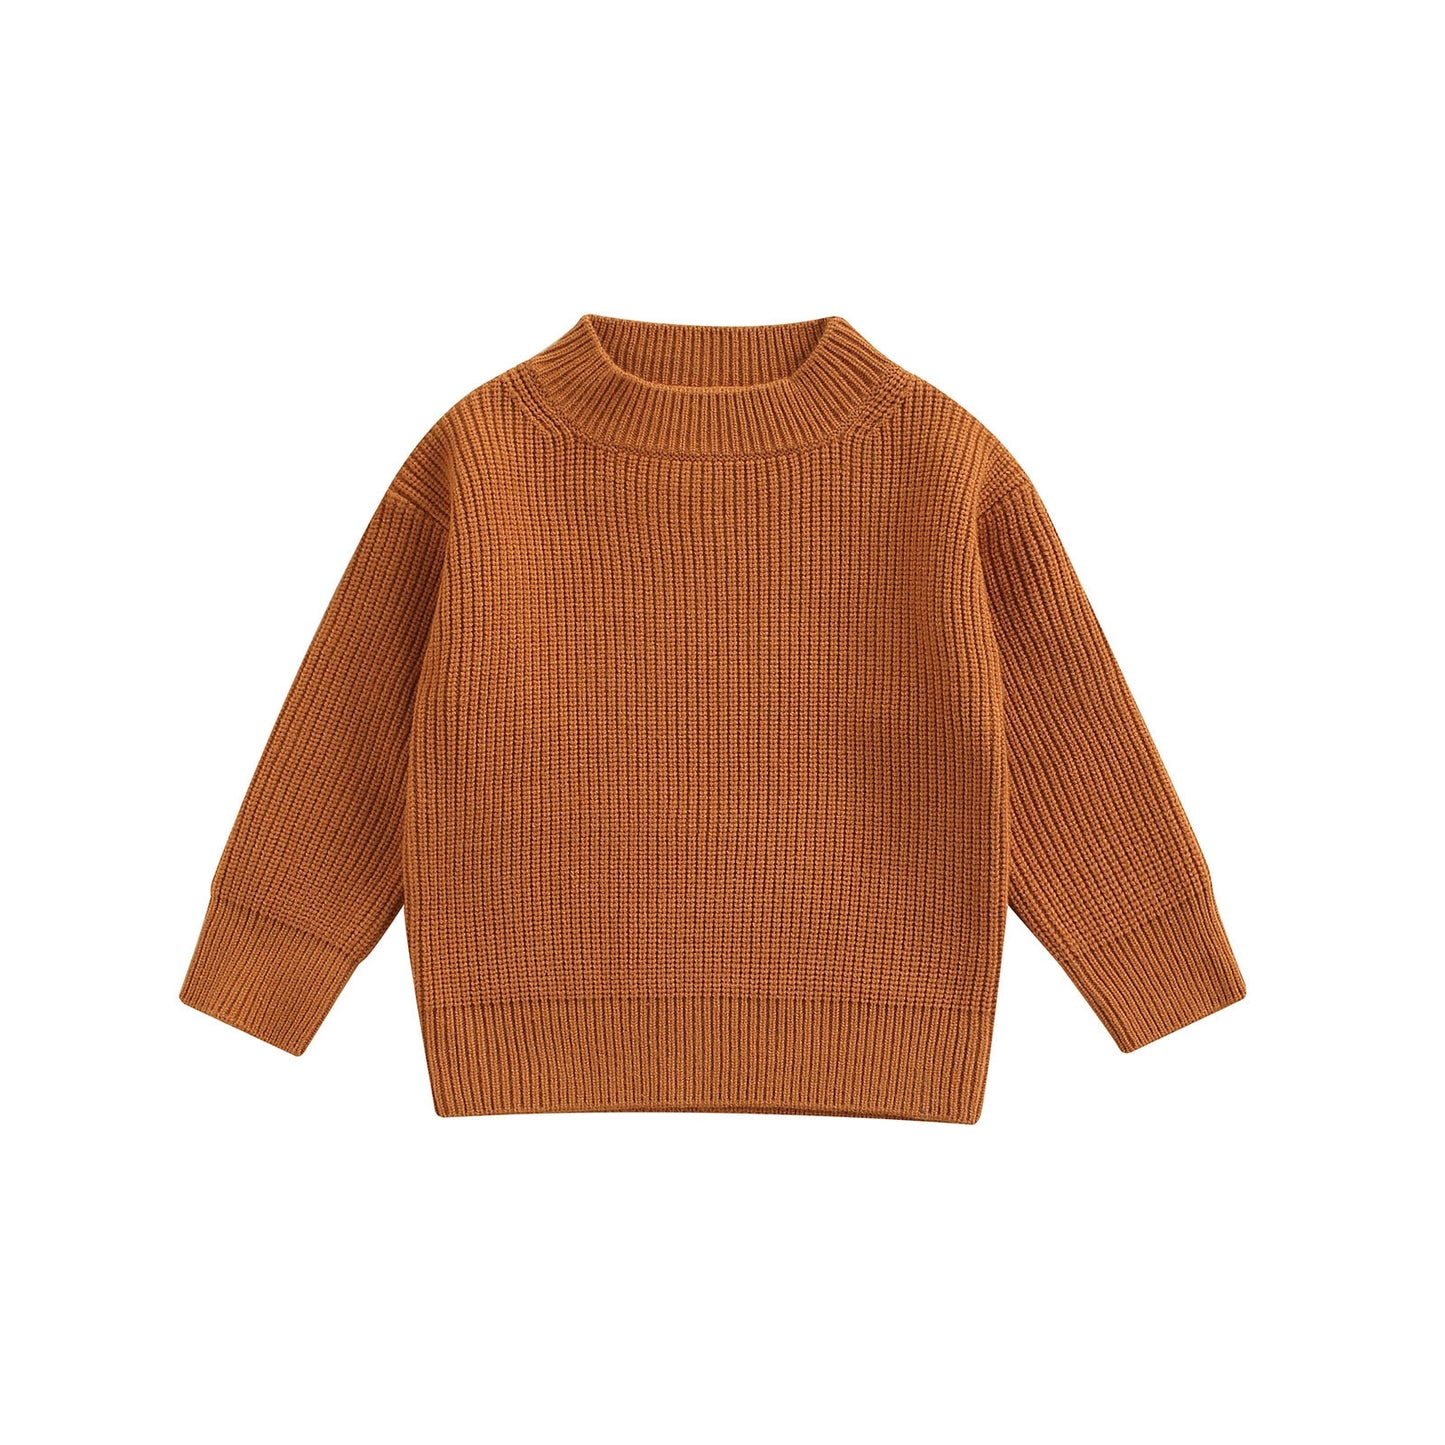 Knit Warm Thick Sweaters for Baby & Toddlers